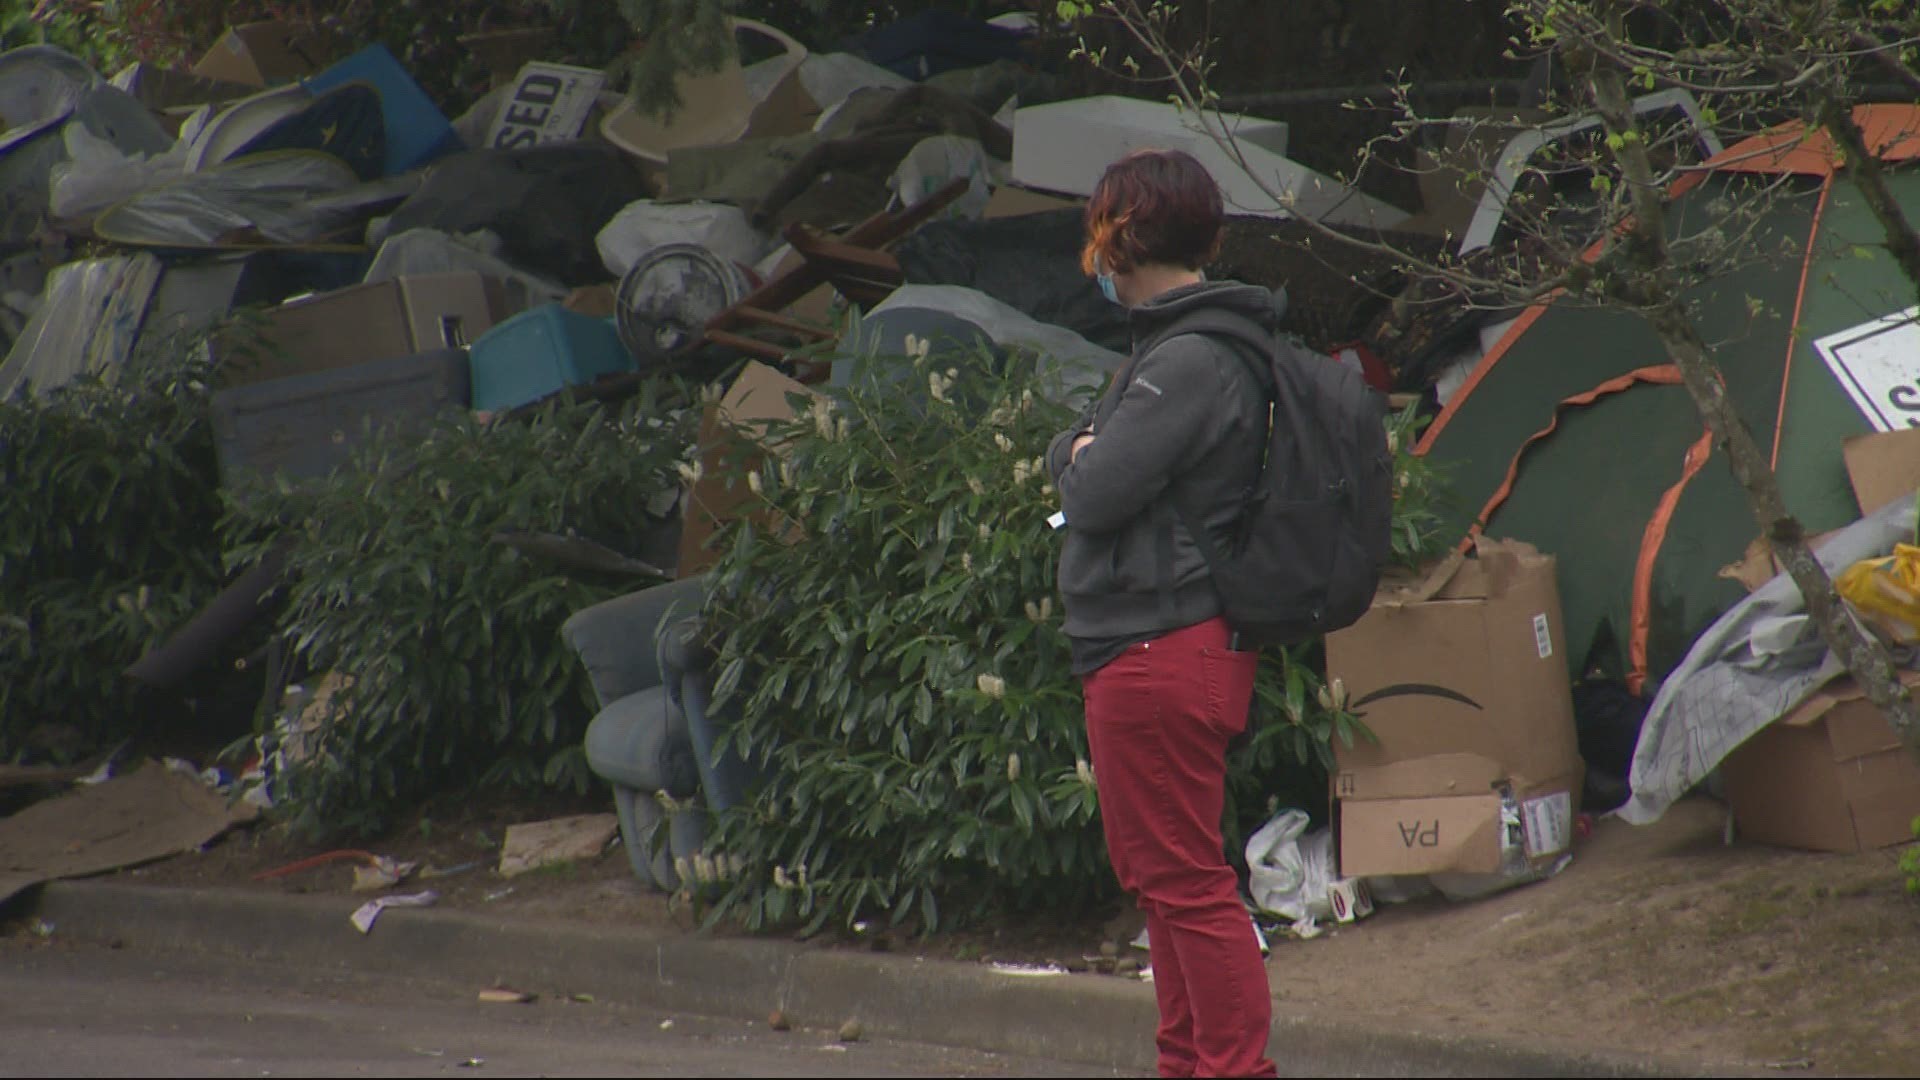 The trash pile located at NE Burnside and 160th Avenue, which didn’t originally qualify to be picked up, will take two days to clear